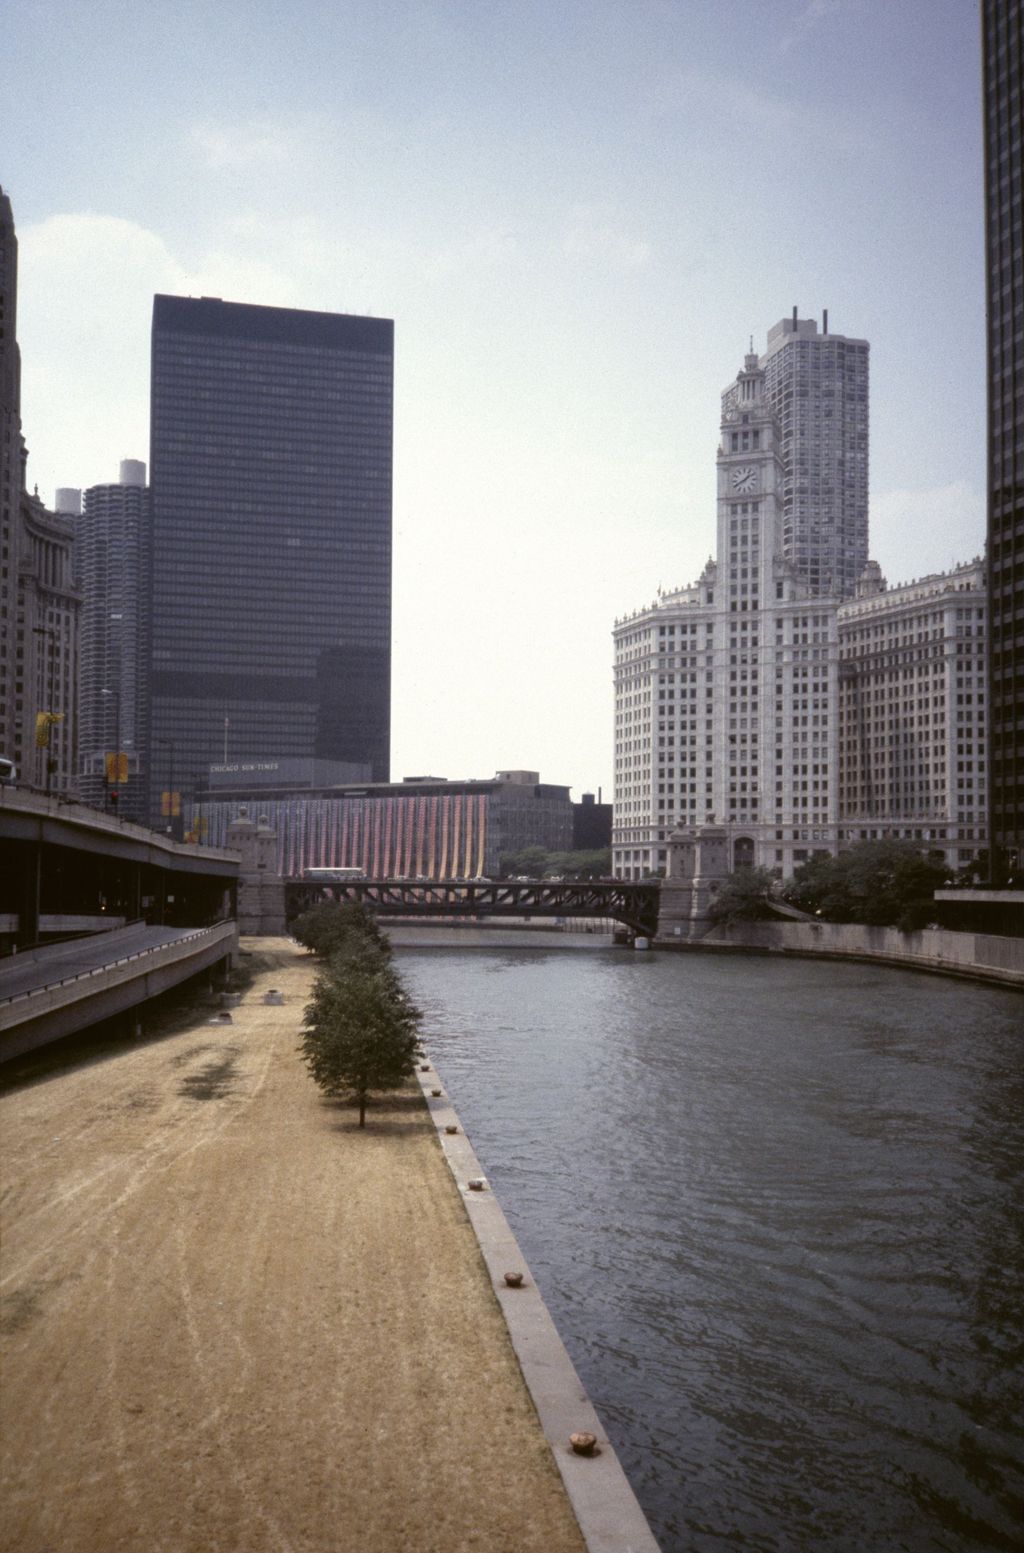 Chicago River and Sun-Times Building with fabric ribbons